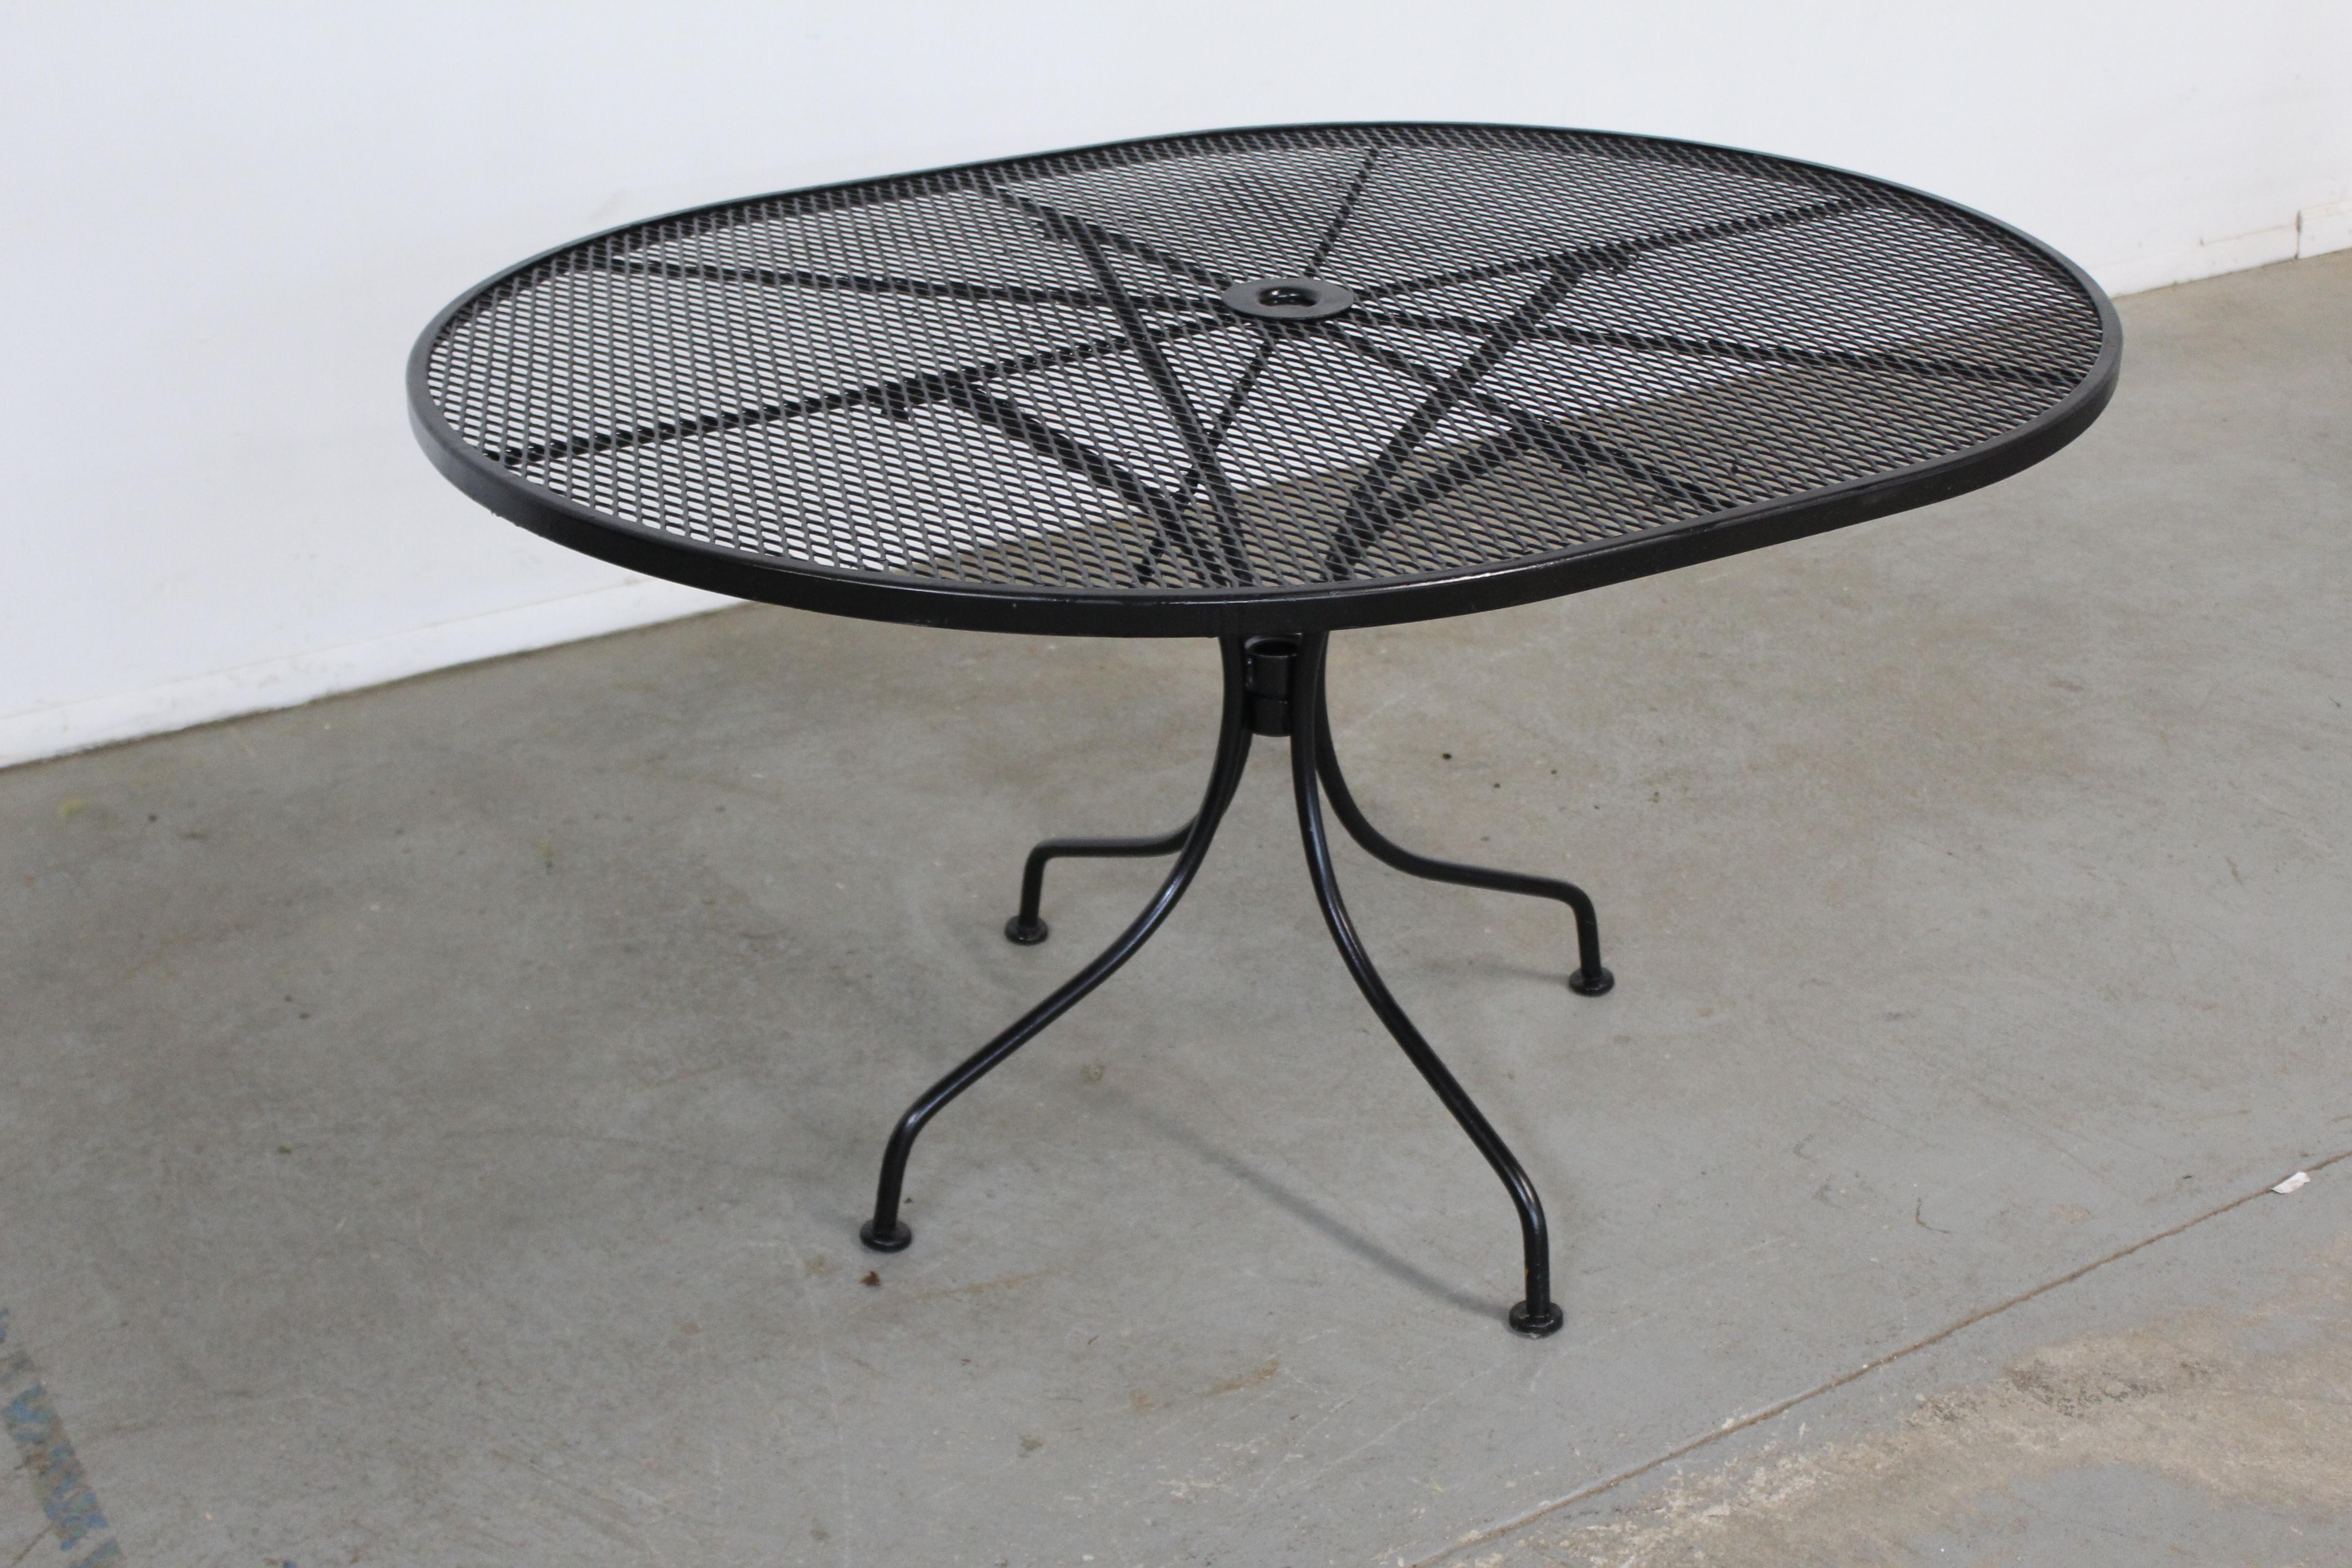 Mid-century outdoor iron woodard oval dining table 
Offered is a mid-century outdoor iron oval table. Features Black paint and woven wrought iron. The table is structurally sound in good condition and can accommodate up to 4 seats. Has been